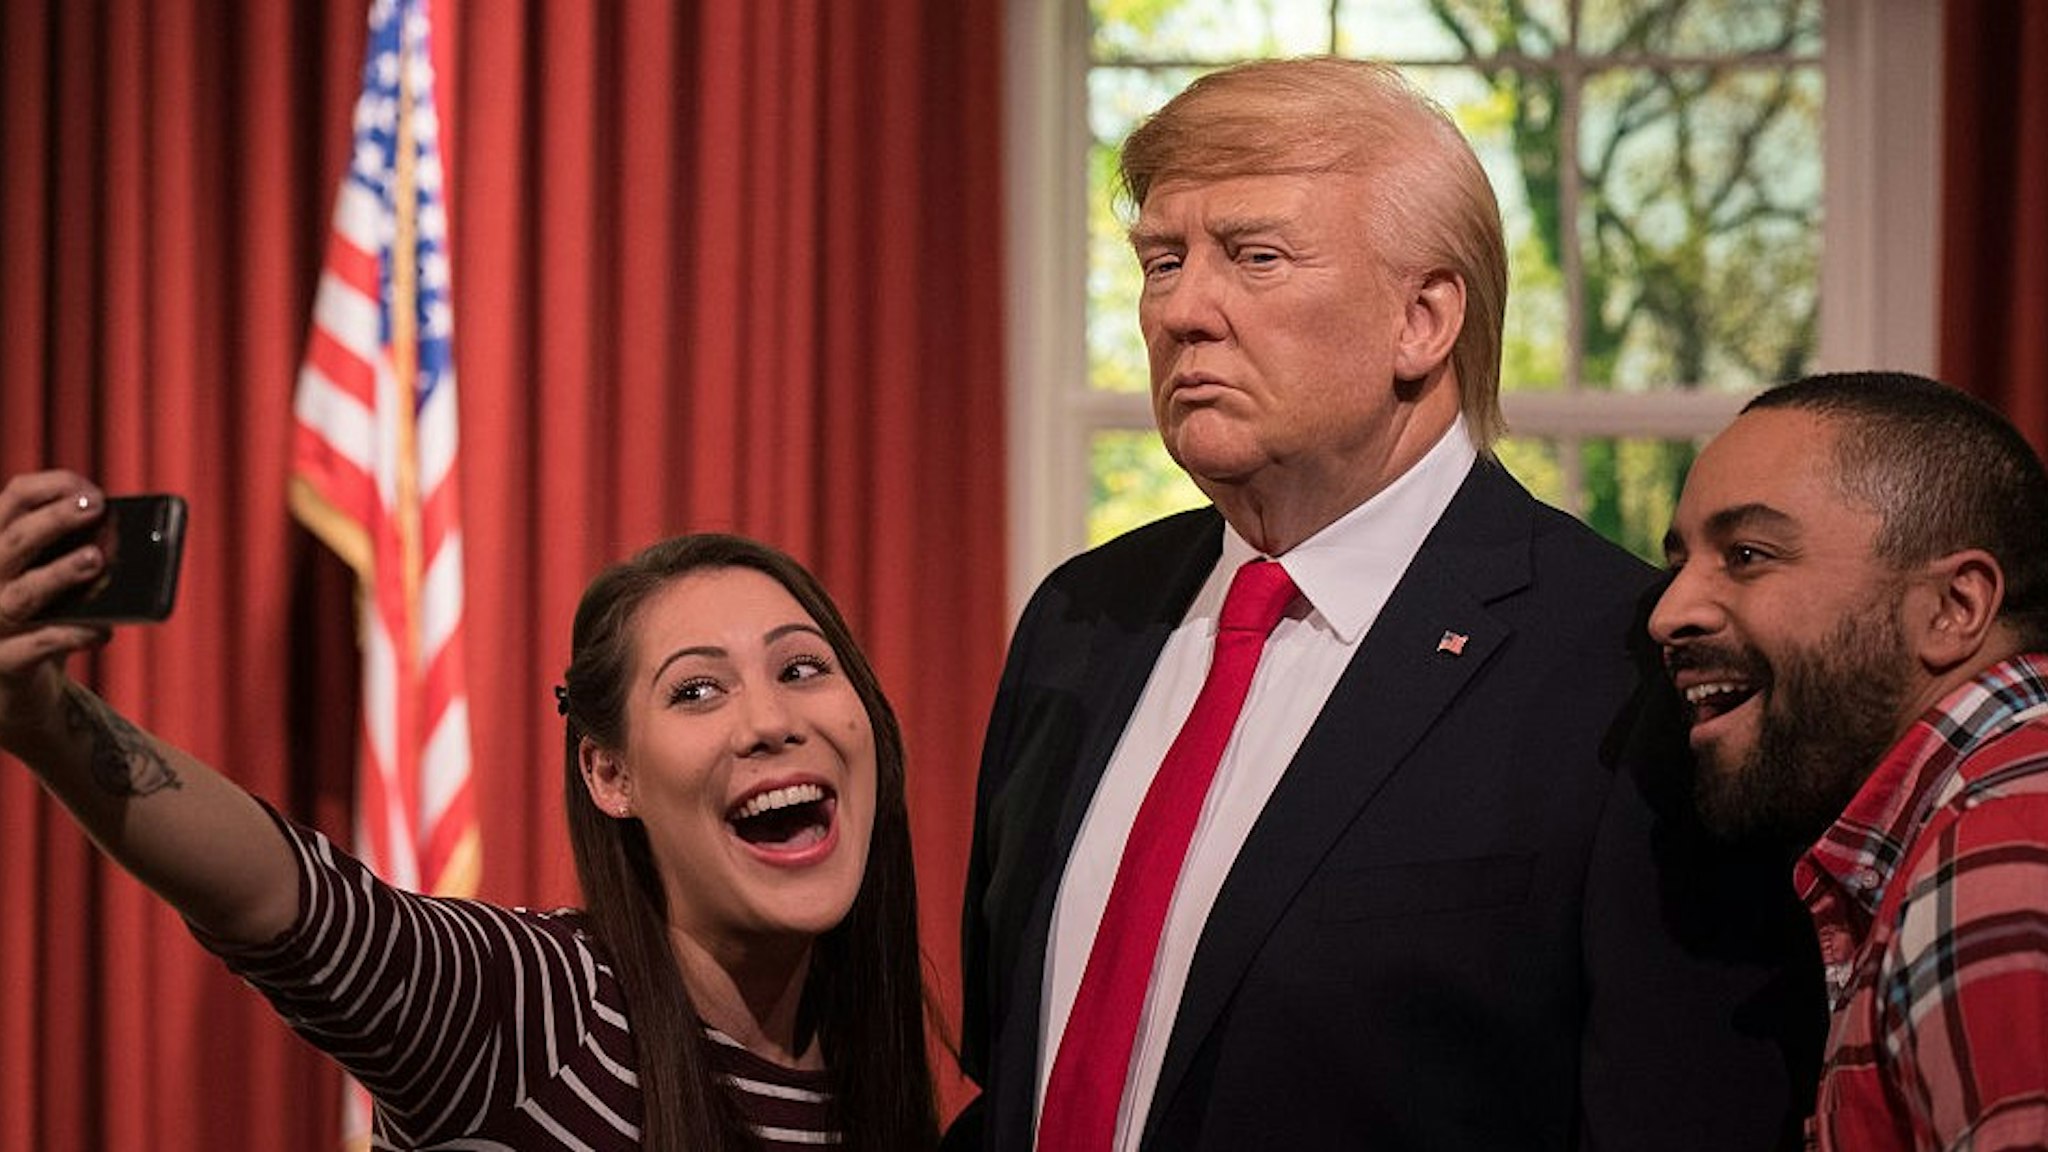 LONDON, ENGLAND - JANUARY 18: Helen Smith and Jason Holliday pose for photographs taking a selfie as Madame Tussauds unveils a wax figure of President-Elect Donald J. Trump ahead of the inauguration on Friday at Madame Tussauds London on January 18, 2017 in London, England. The figure of Donald Trump is placed amongst the setting of the Oval Office. (Photo by